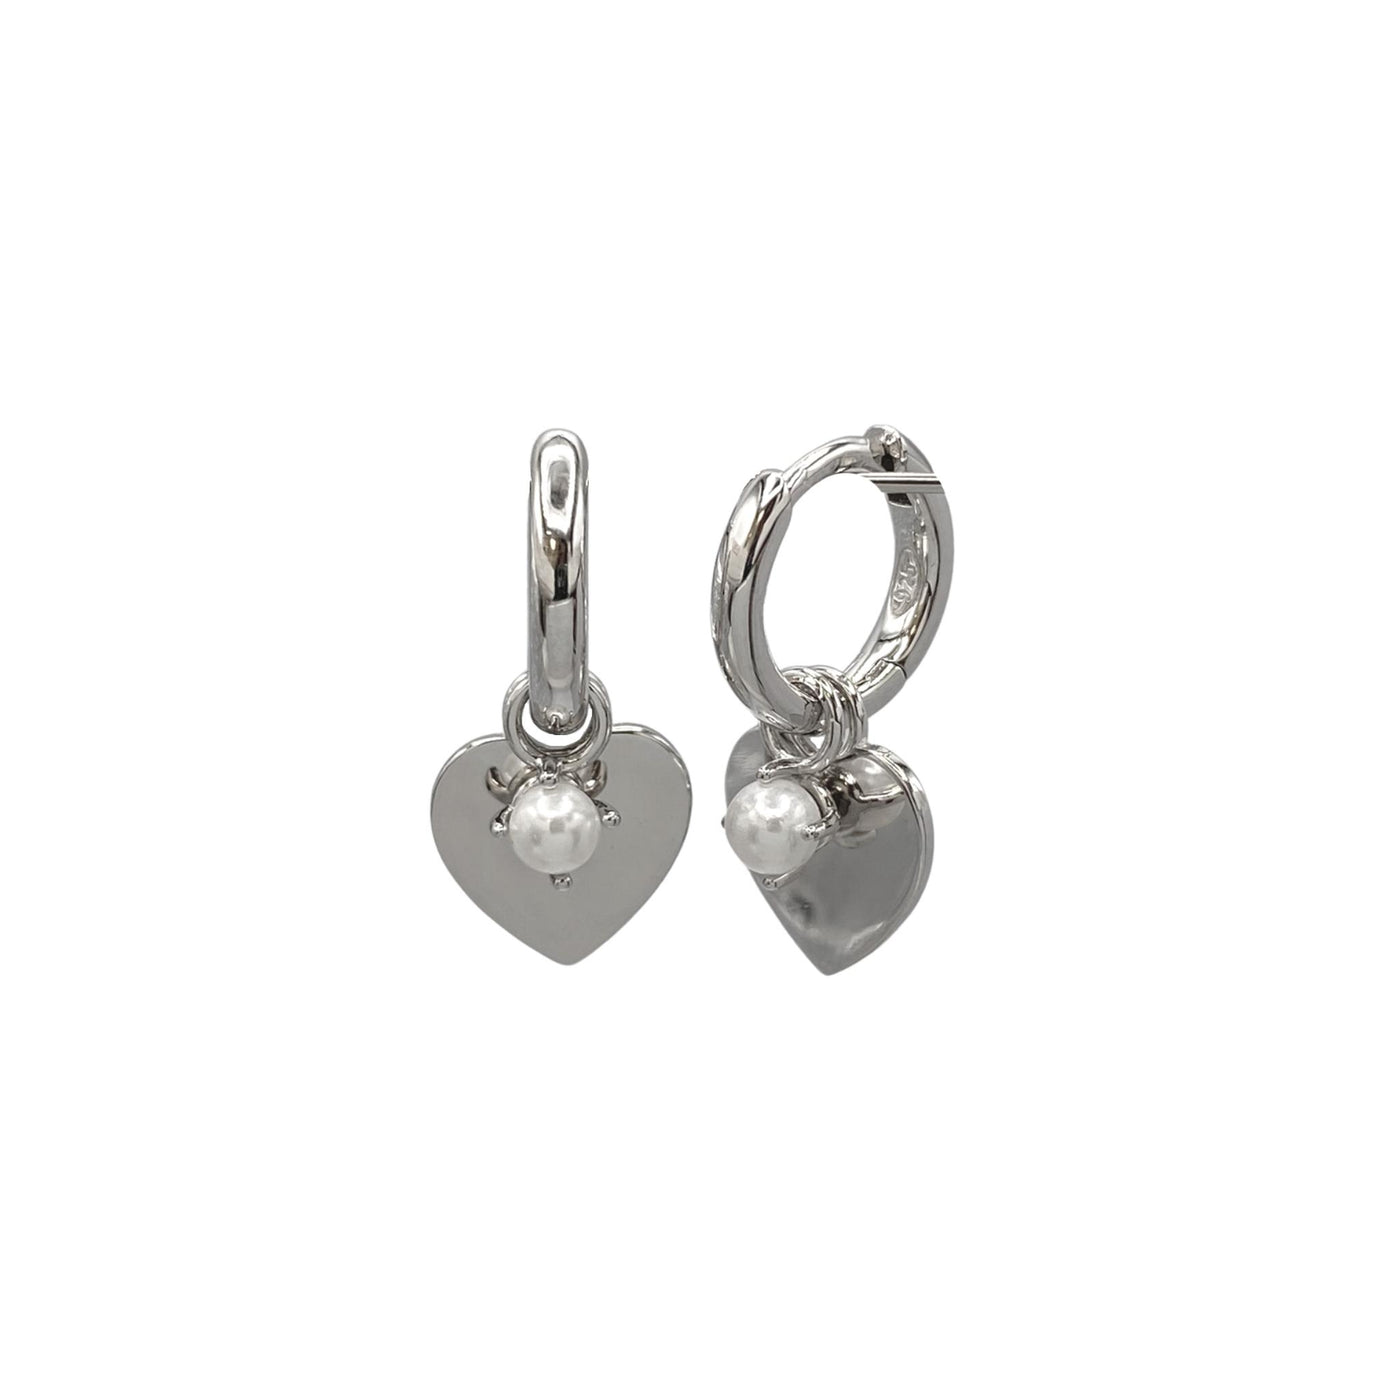 Silver hoop earrings with hearts and pearl charms